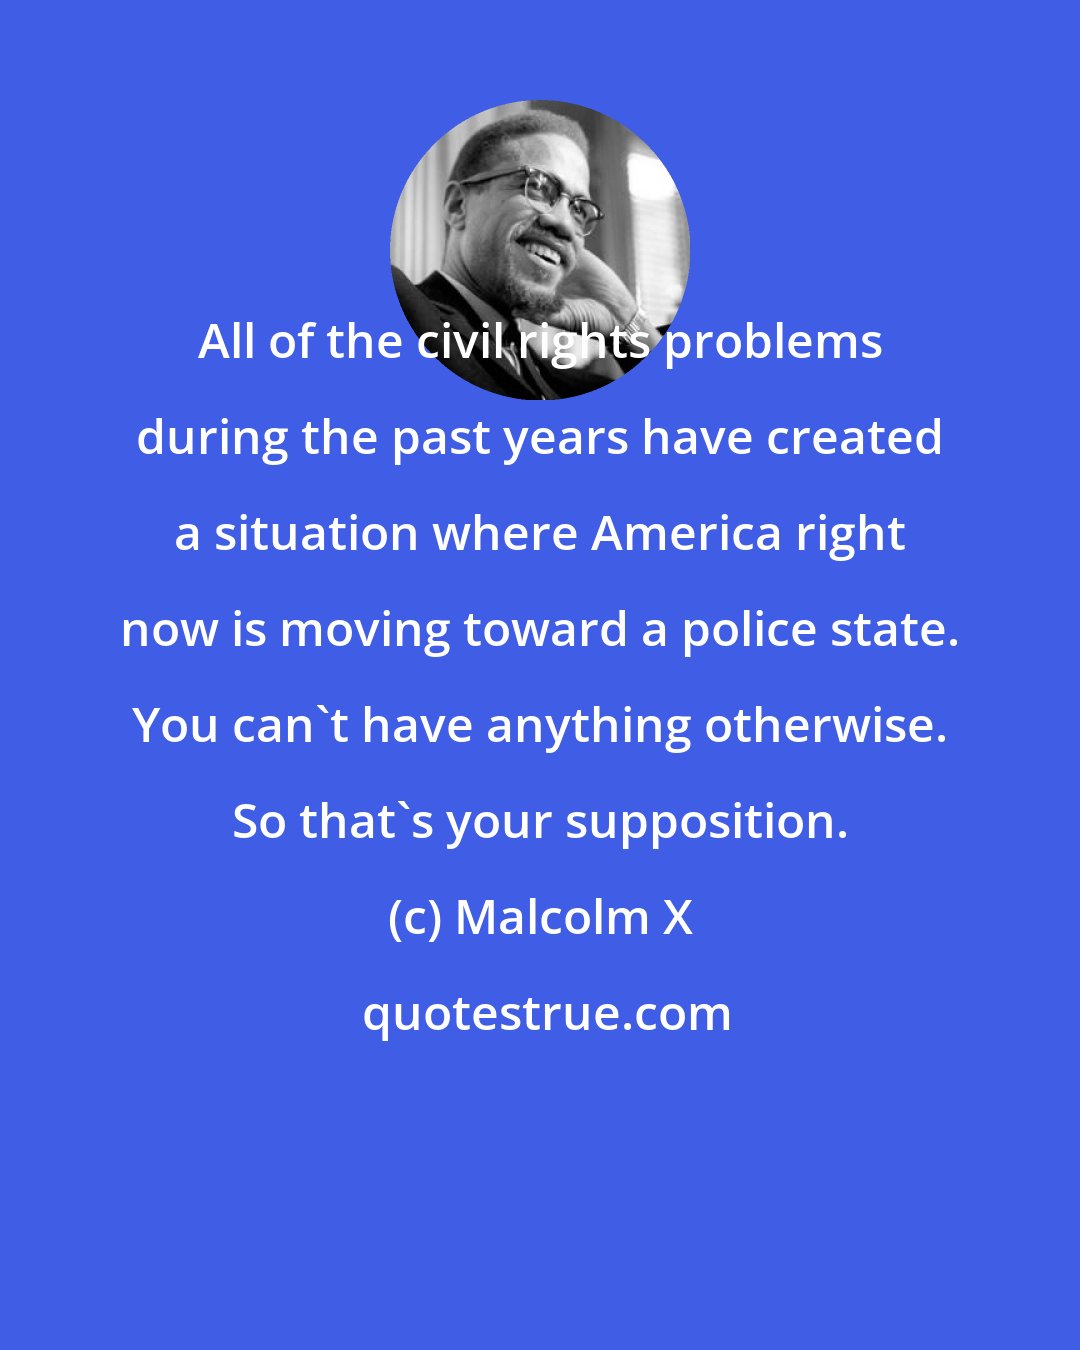 Malcolm X: All of the civil rights problems during the past years have created a situation where America right now is moving toward a police state. You can't have anything otherwise. So that's your supposition.